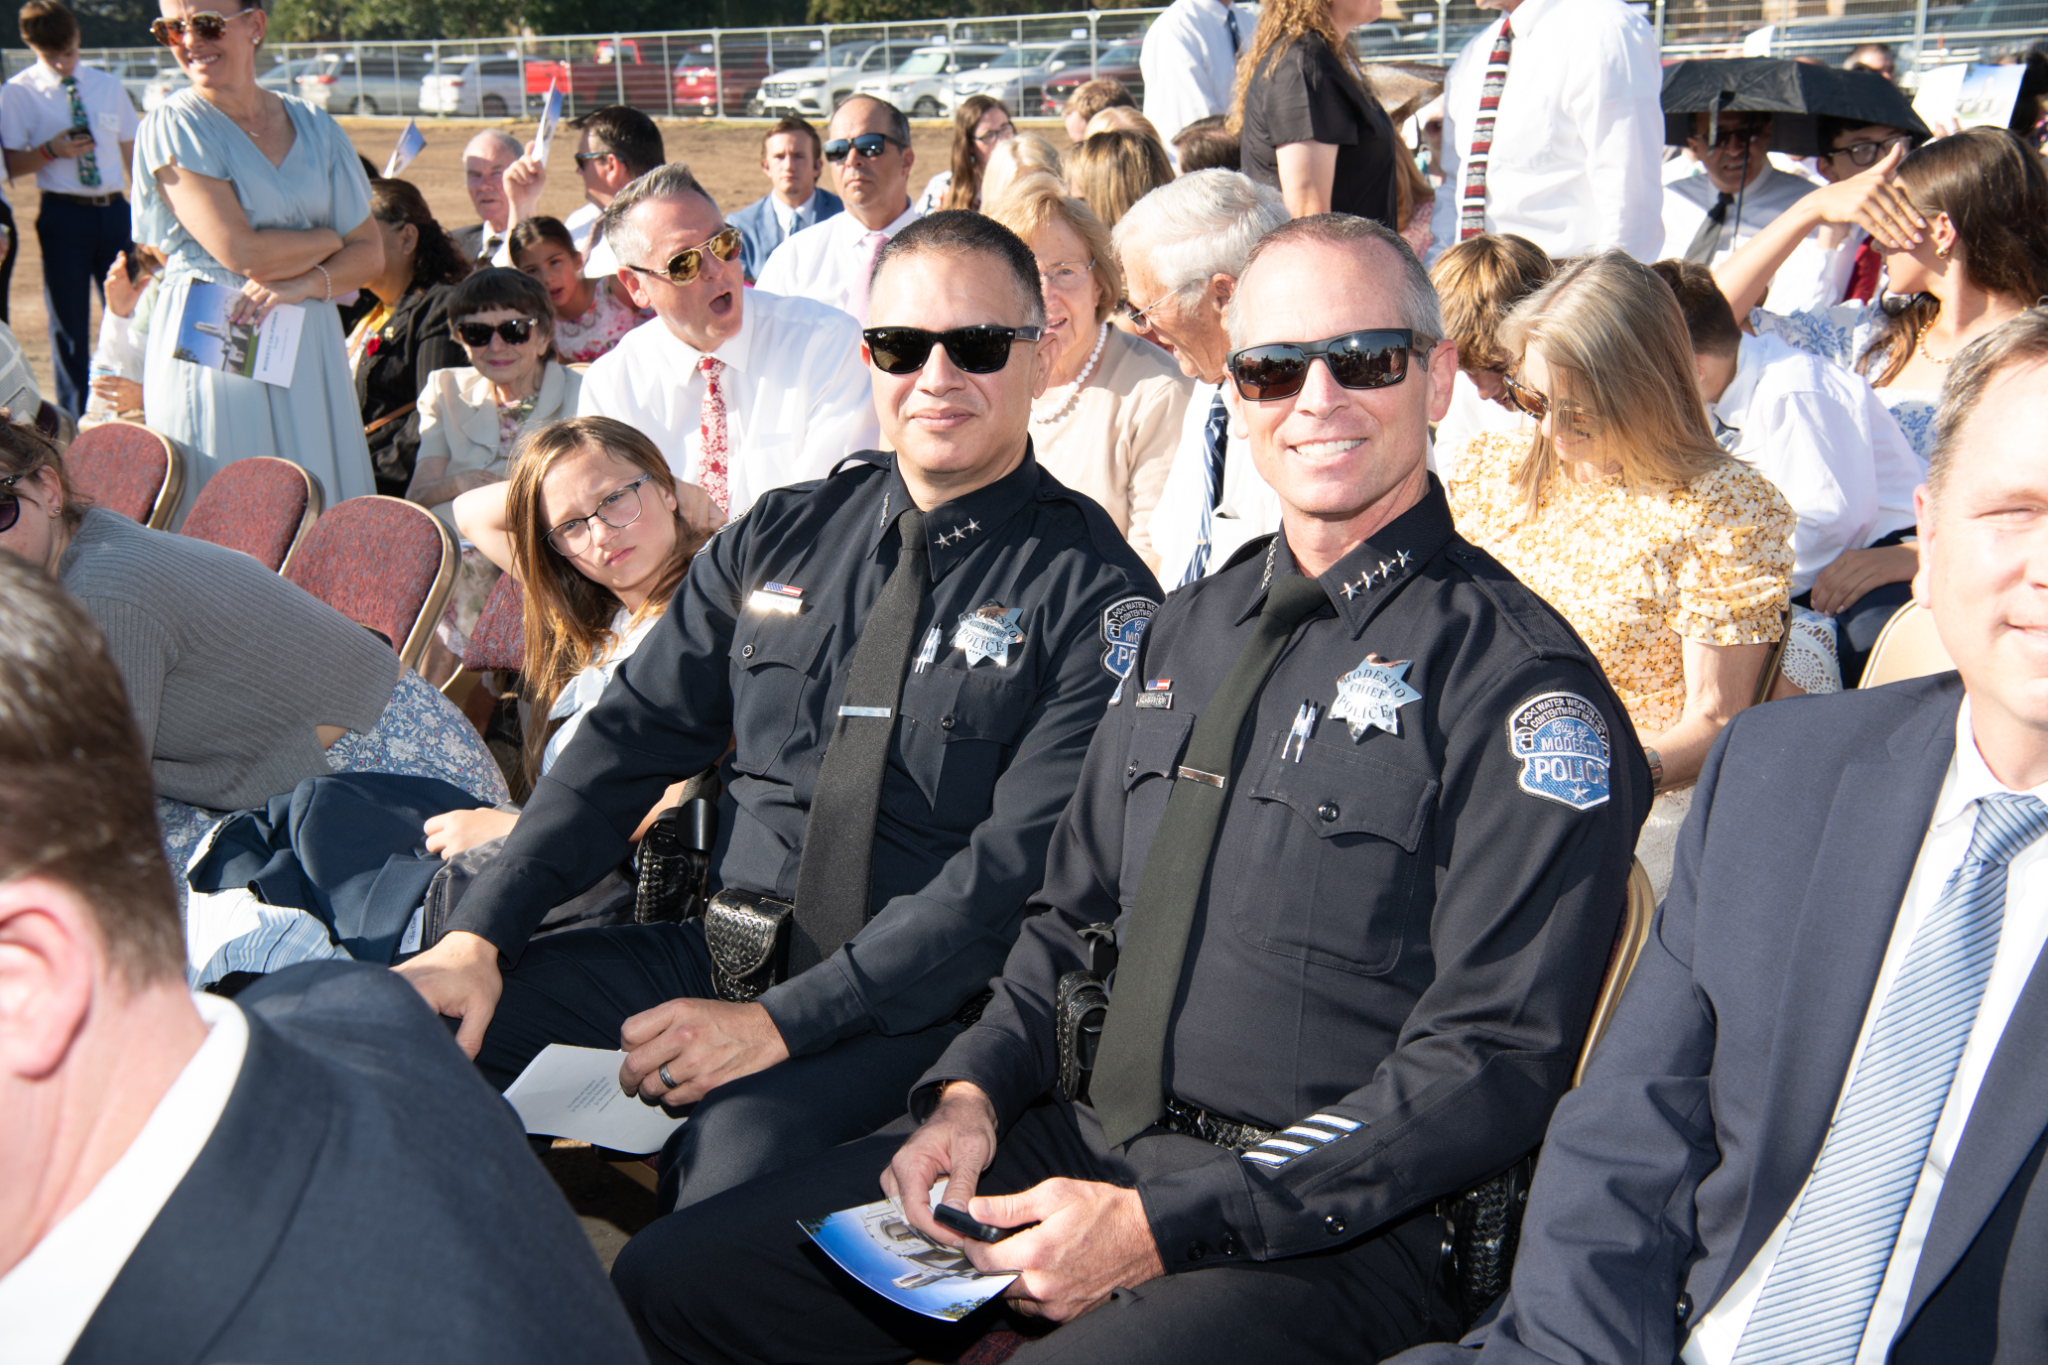 Two smiling police officers in a large group of people sitting in chairs outside.